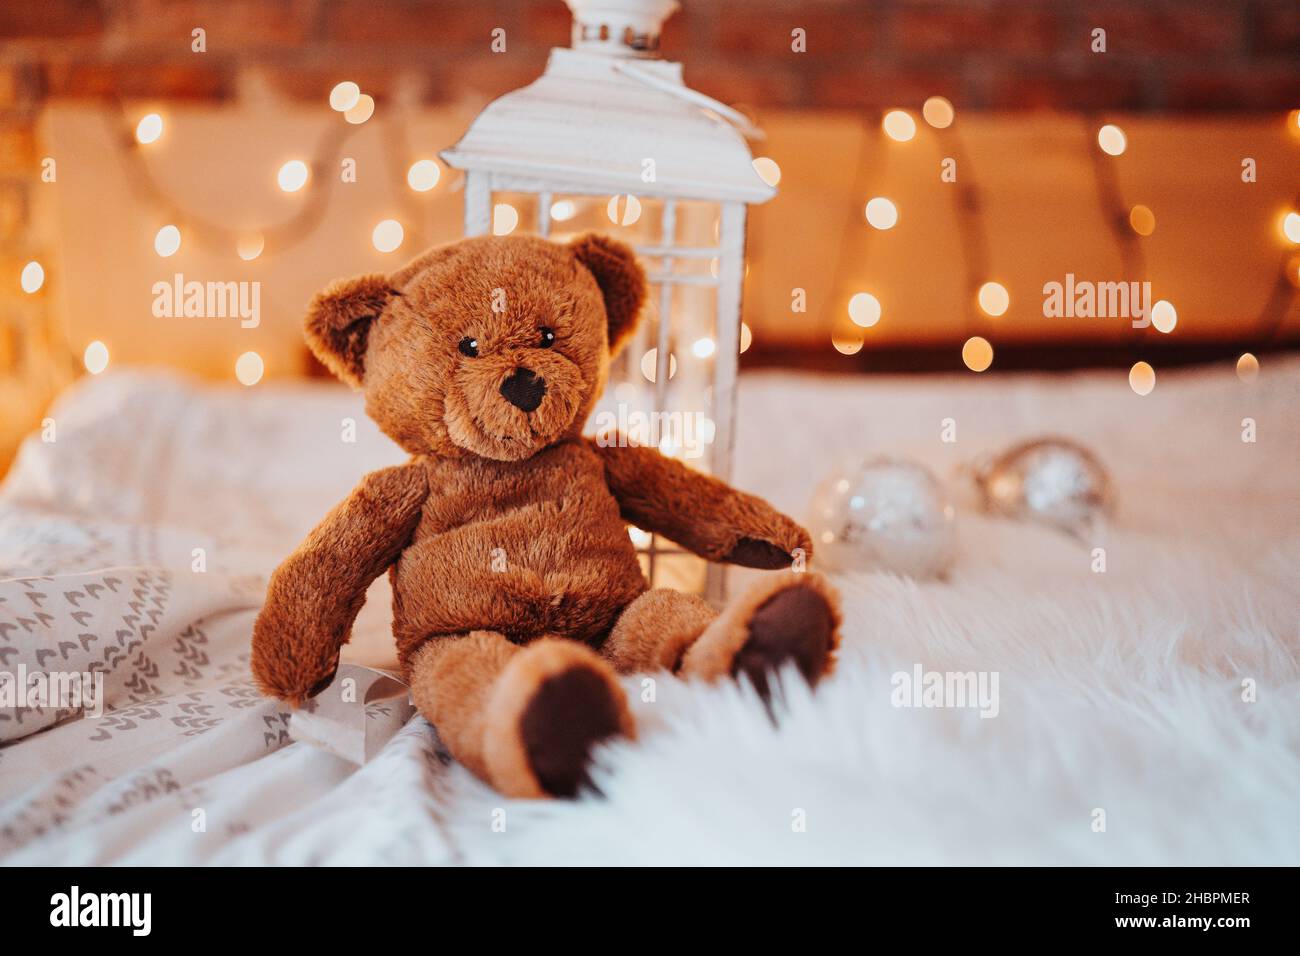 Teddy bear and christmas decorations on red background. Stock Photo